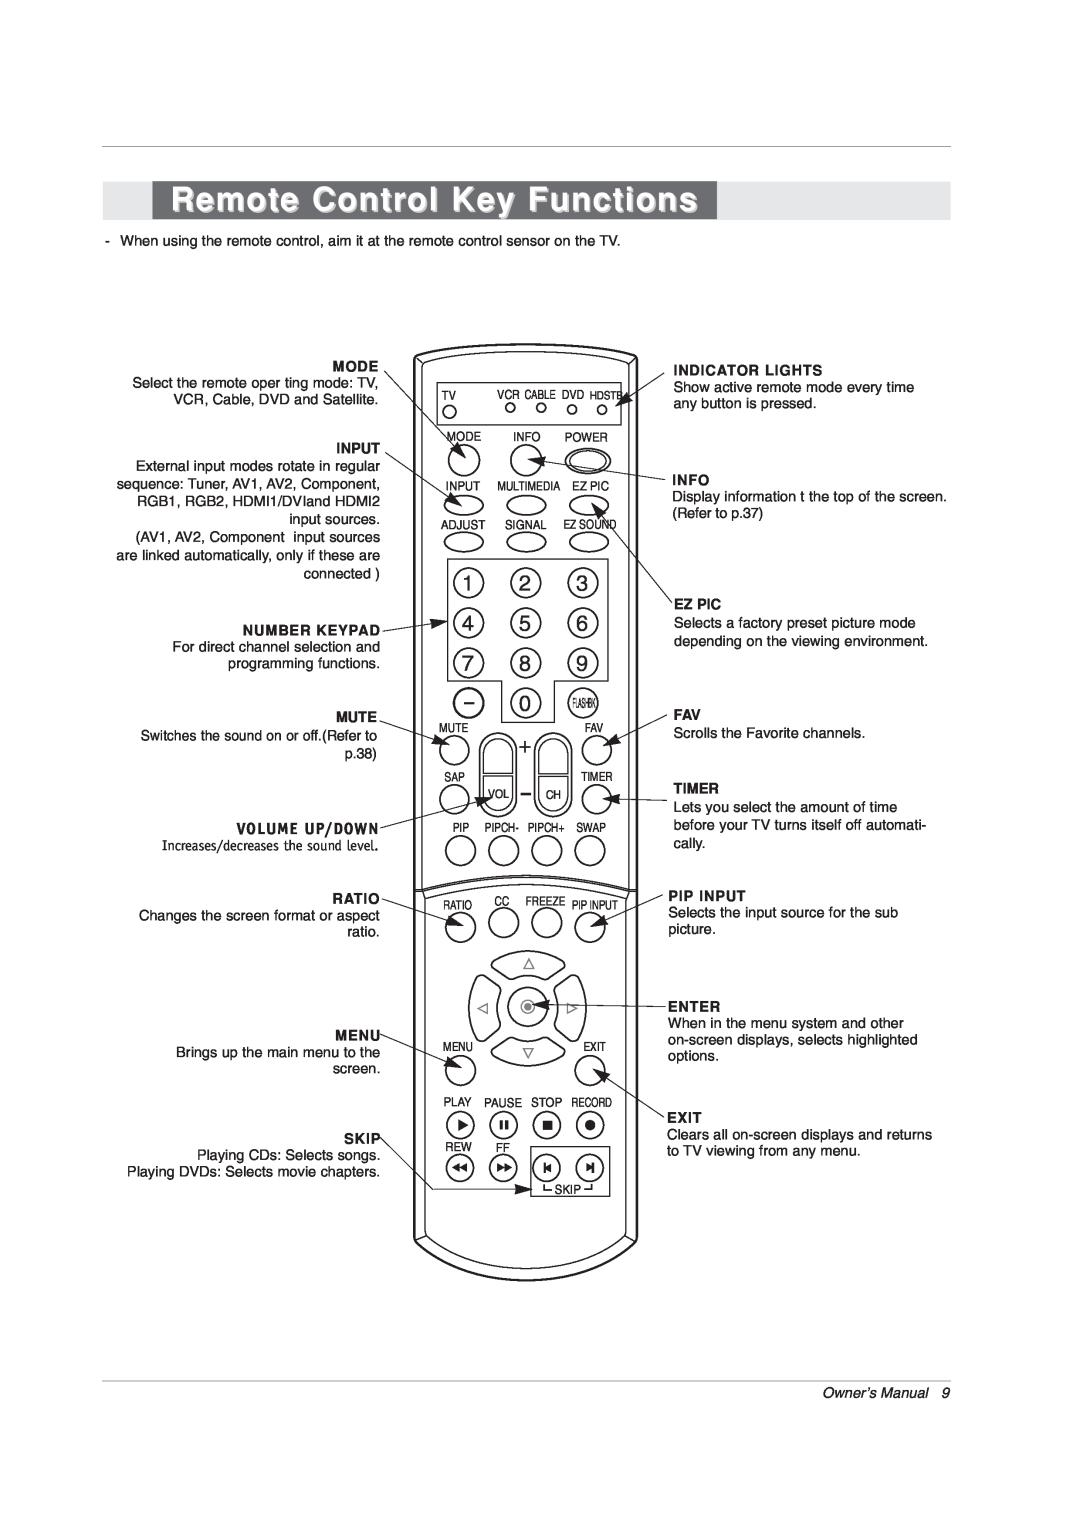 LG Electronics 42PX7DC owner manual Remote Control Key Functions, Volume Up/Down, Owner’s Manual 